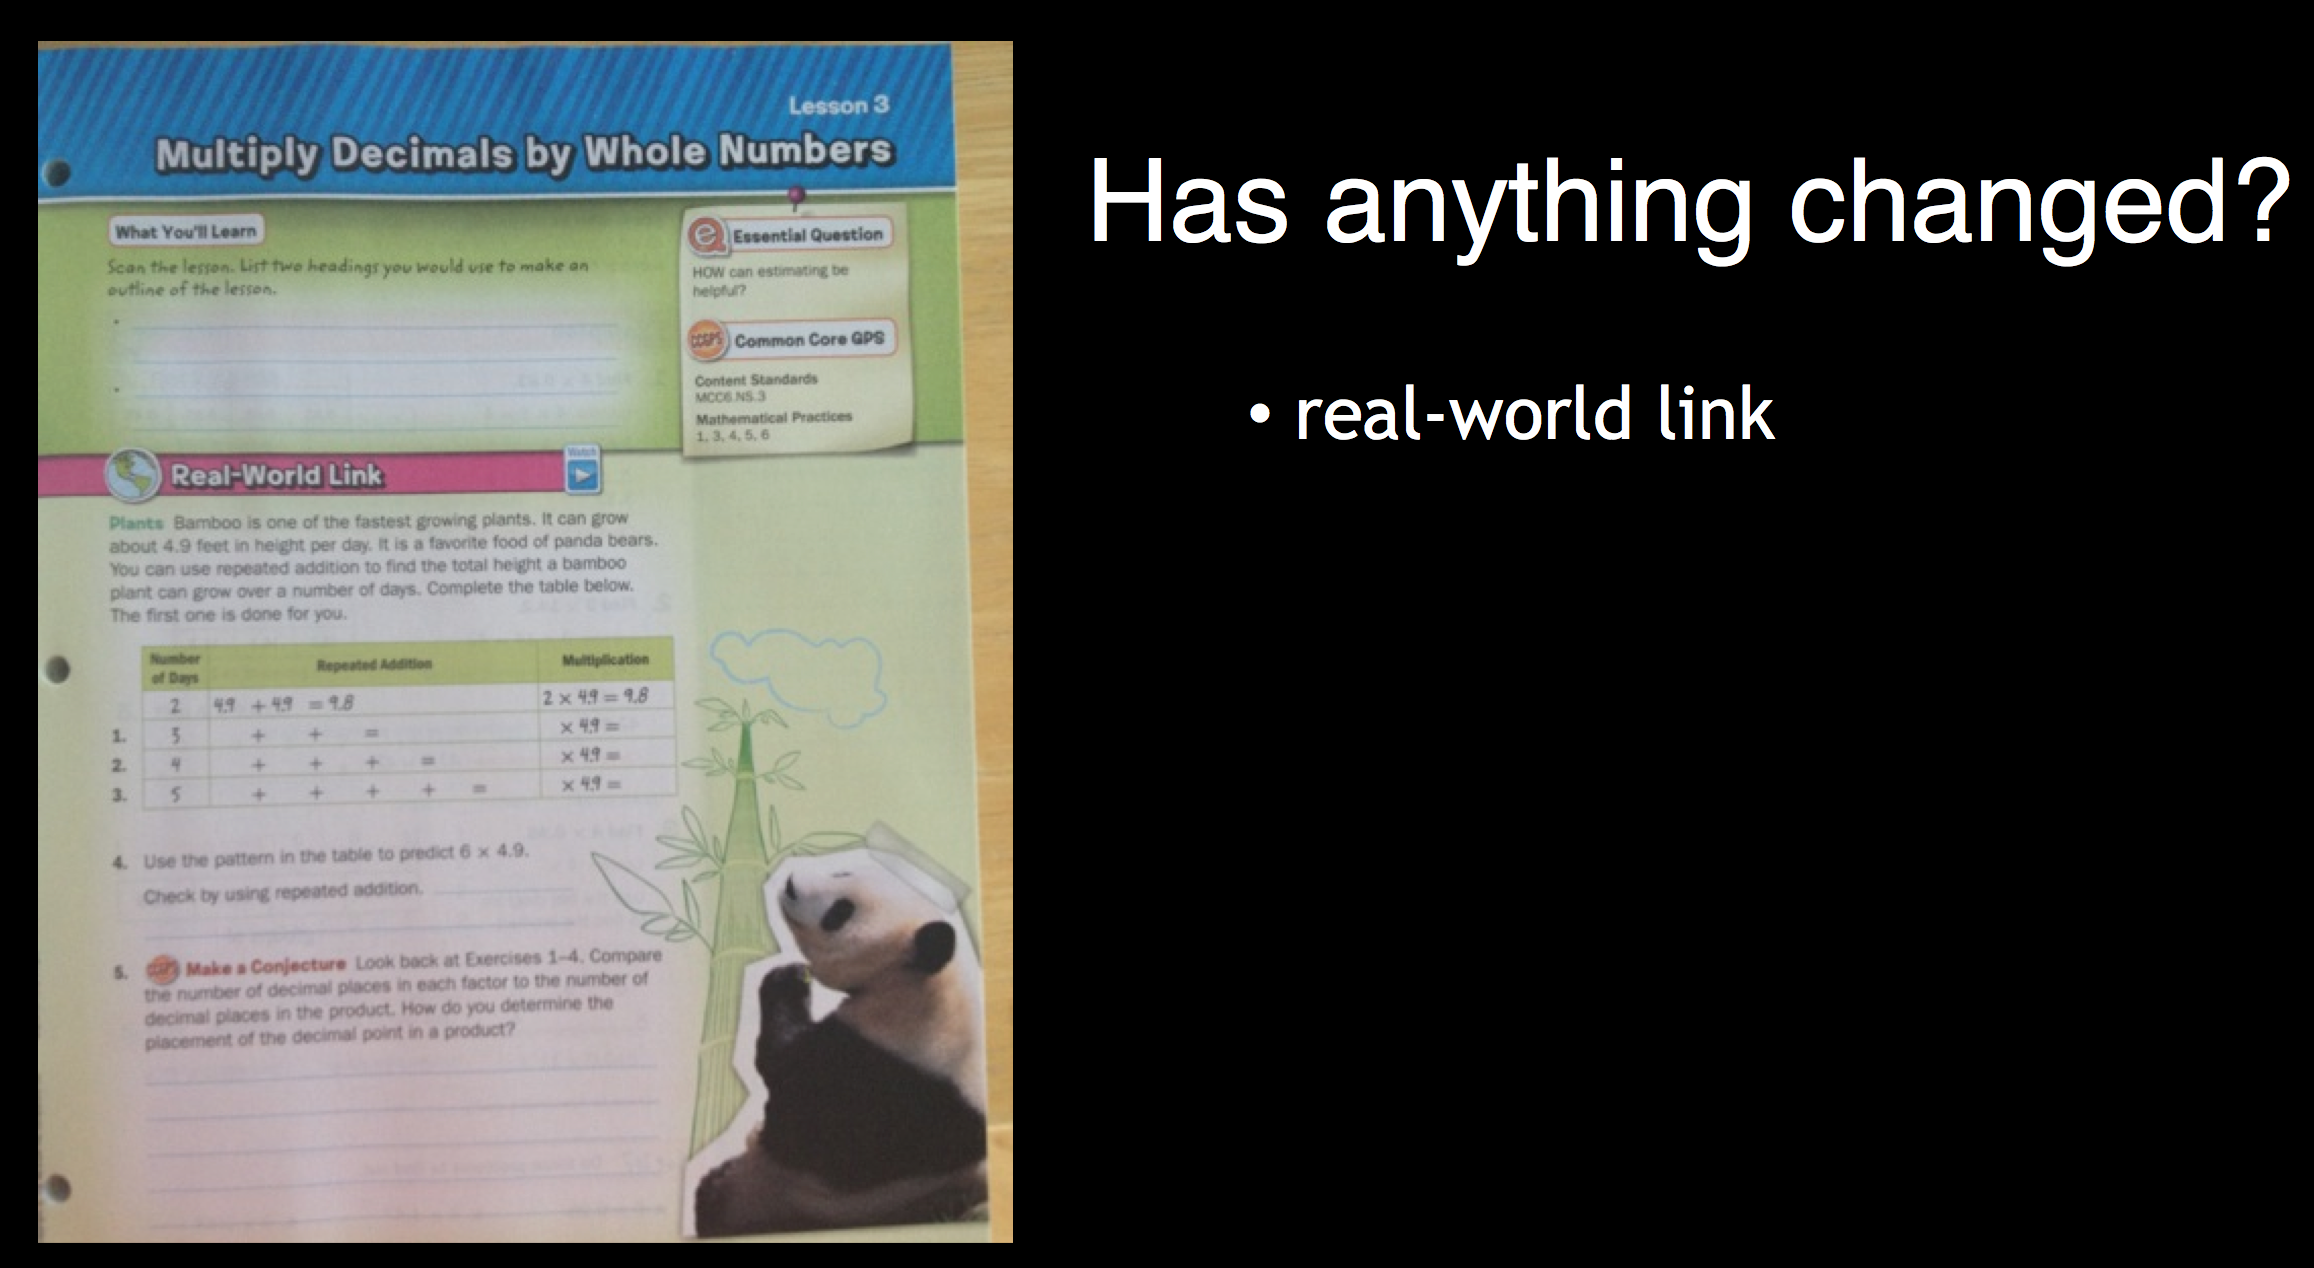 The picture of the panda validates the real-world-ness of the problem